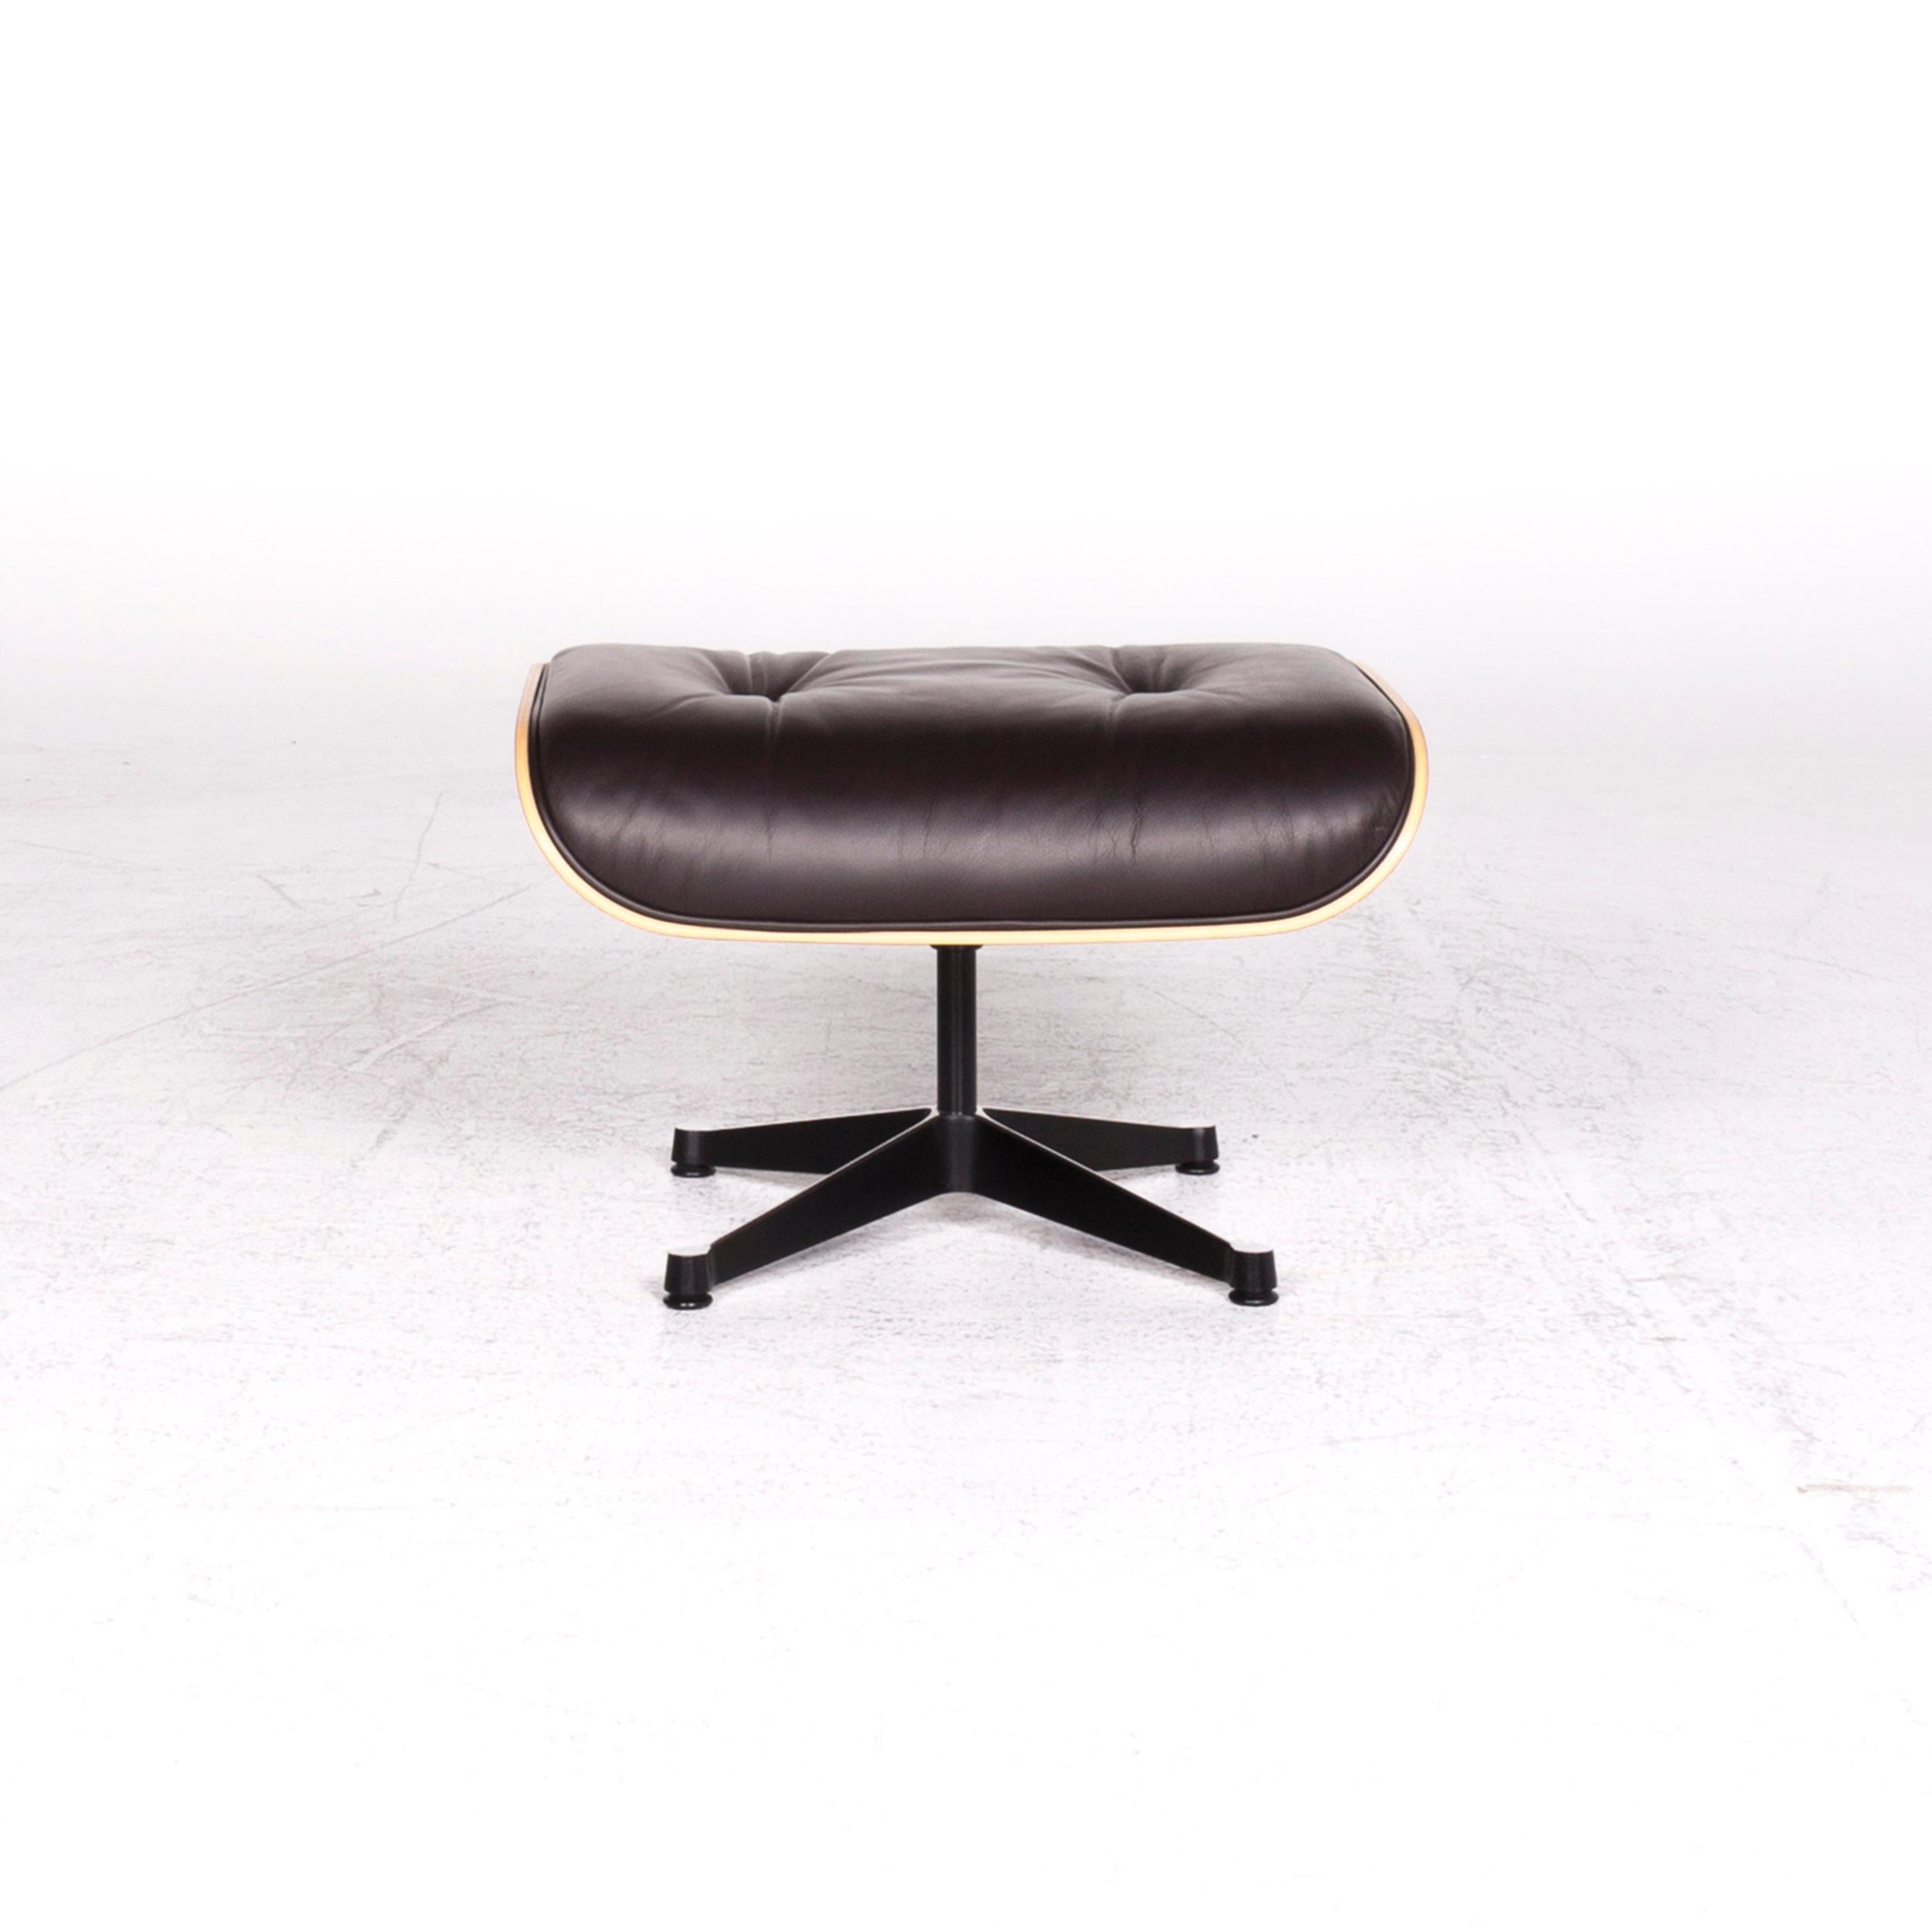 We bring to you a Vitra Eames lounge chair leather stool brown Charles & Ray Eames chair.

Product measurements in centimeters:

Depth 54
Width 64
Height 42.





 